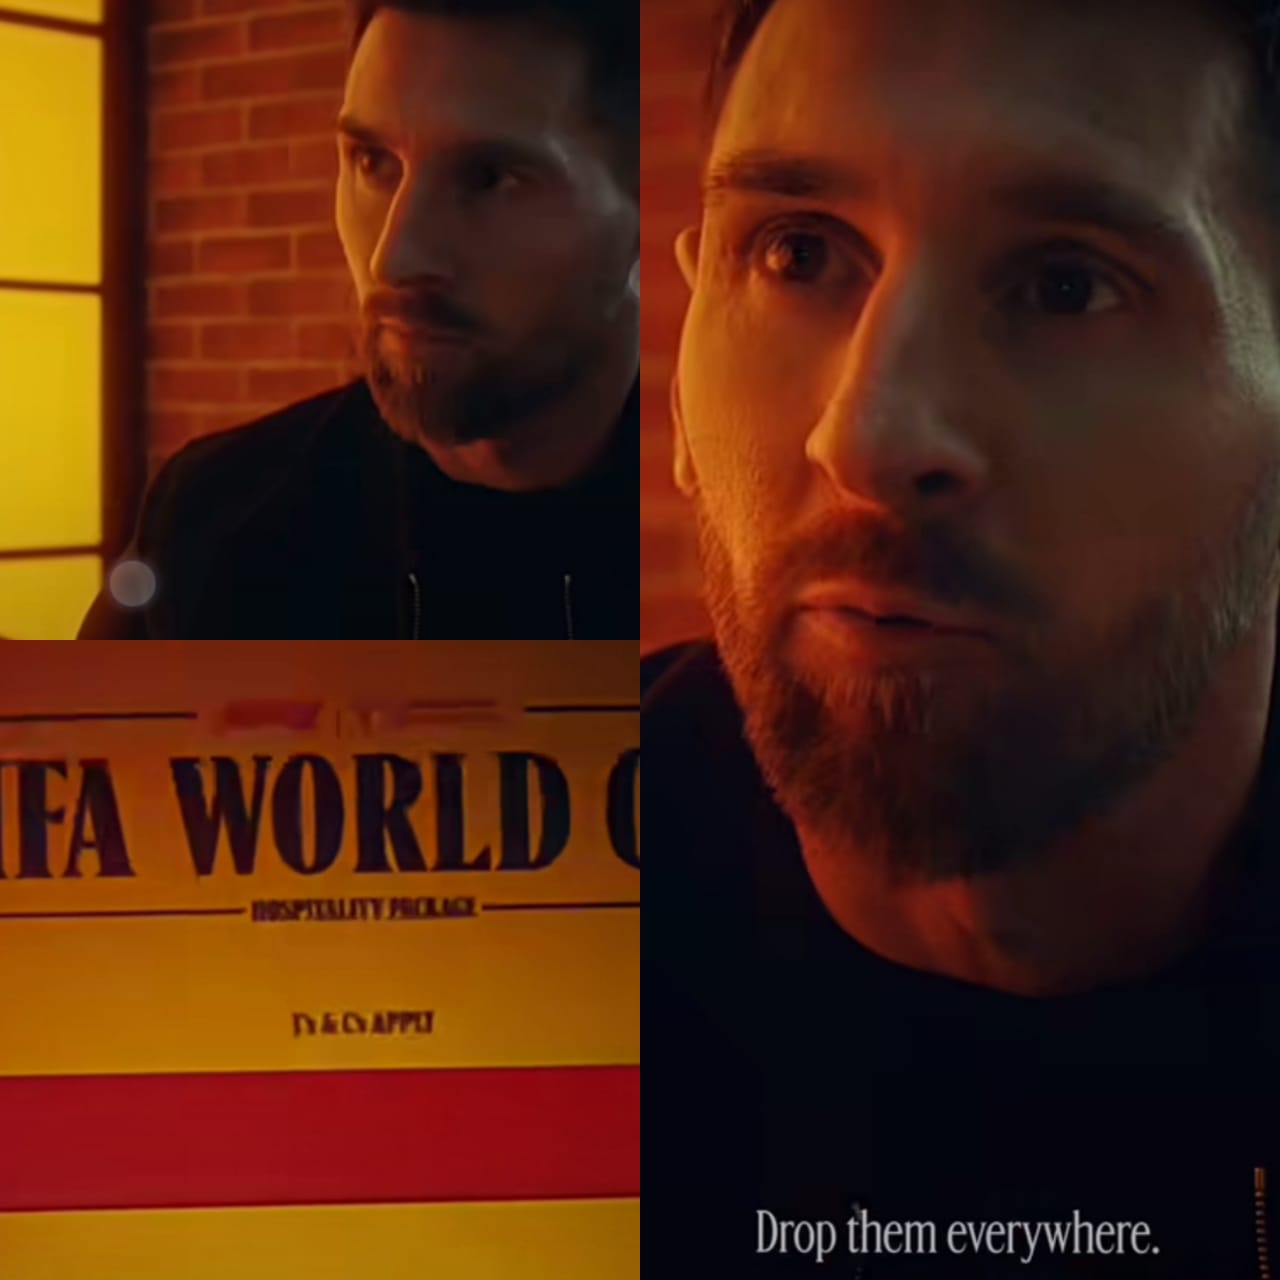 FIFA World Cup 2022: Budweiser Celebrates 100 Days to The FIFA World Cup TM by Partnering with Messi, Neymar Jr. and Sterling to Drop Hundreds of Prizes For Fans Around the World